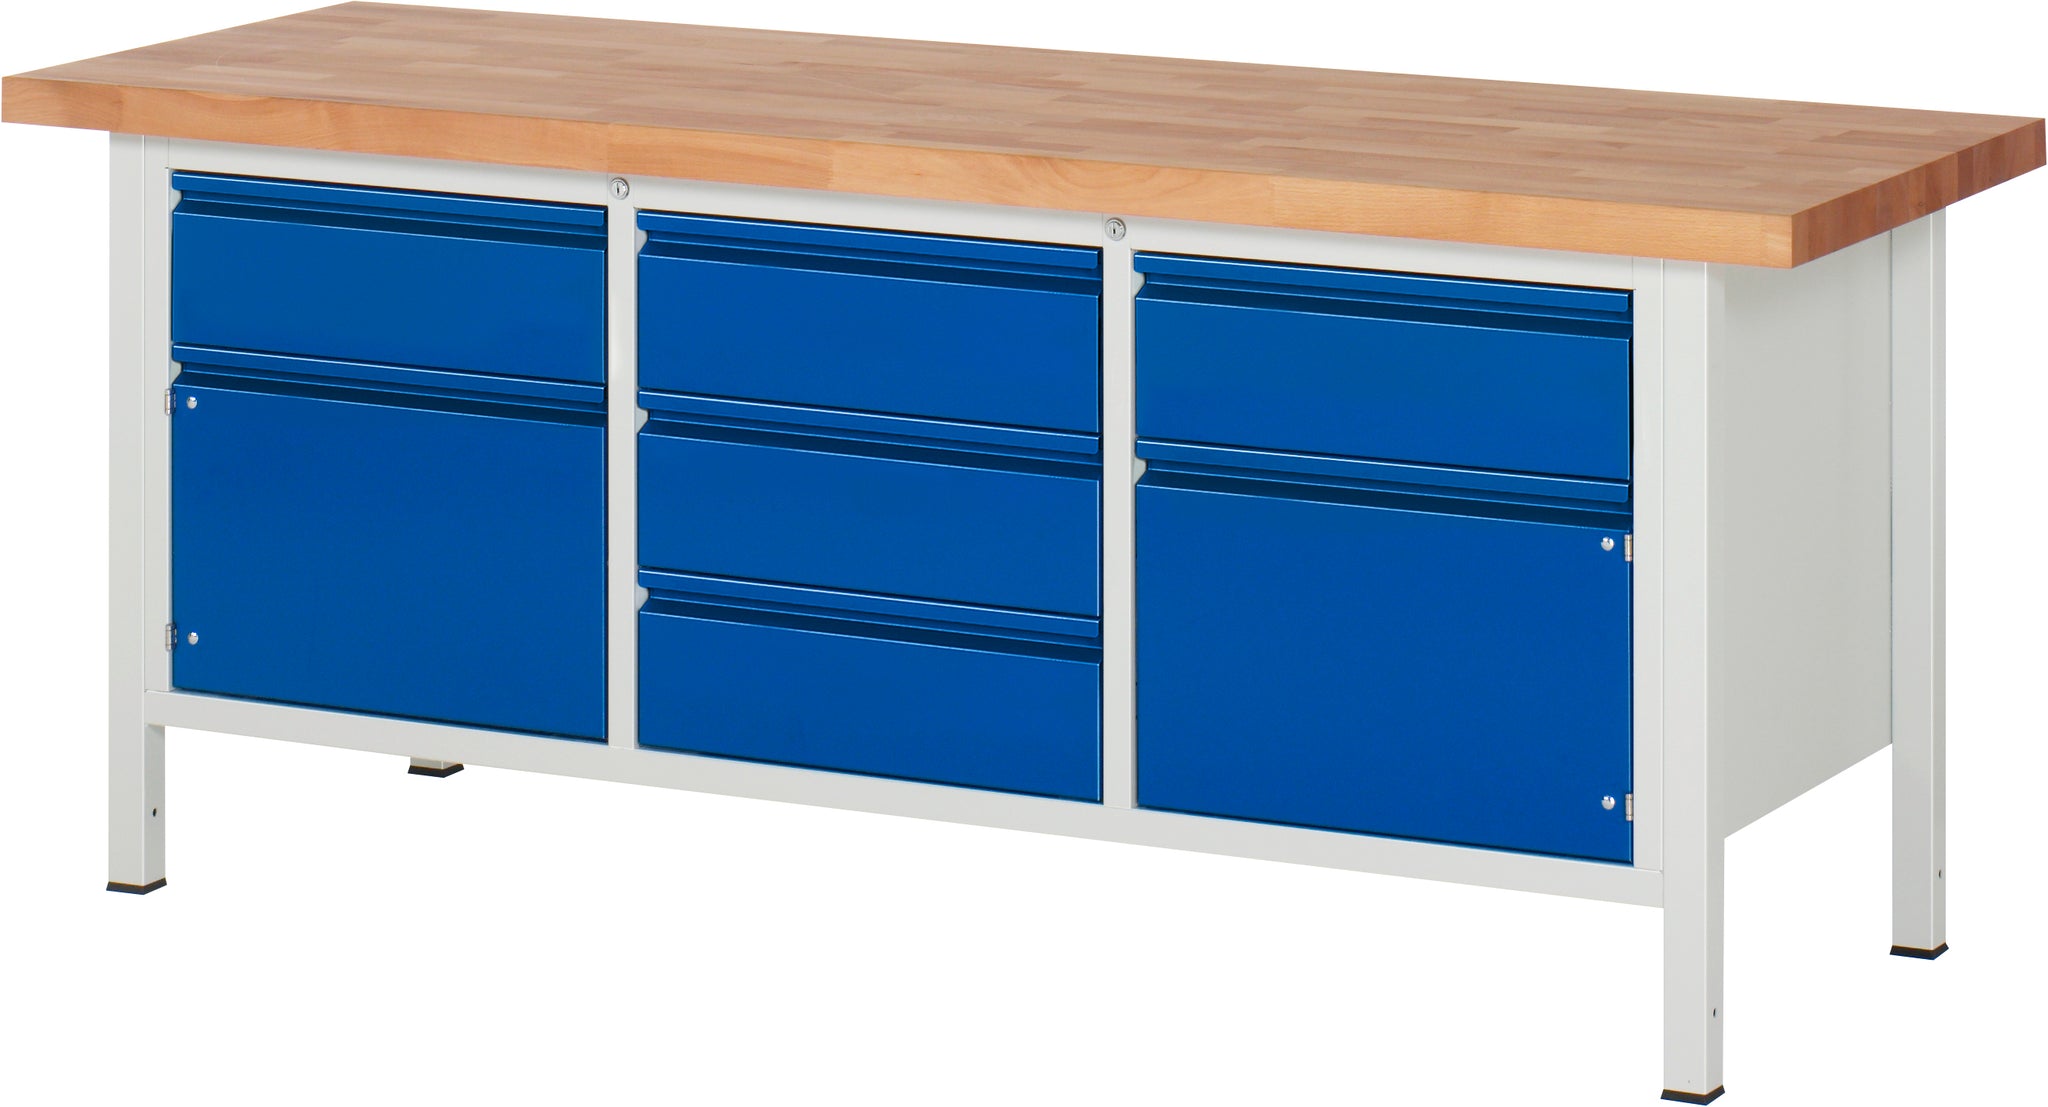 Industrial Workbenches with Drawers and Cabinets - EquiptoWork